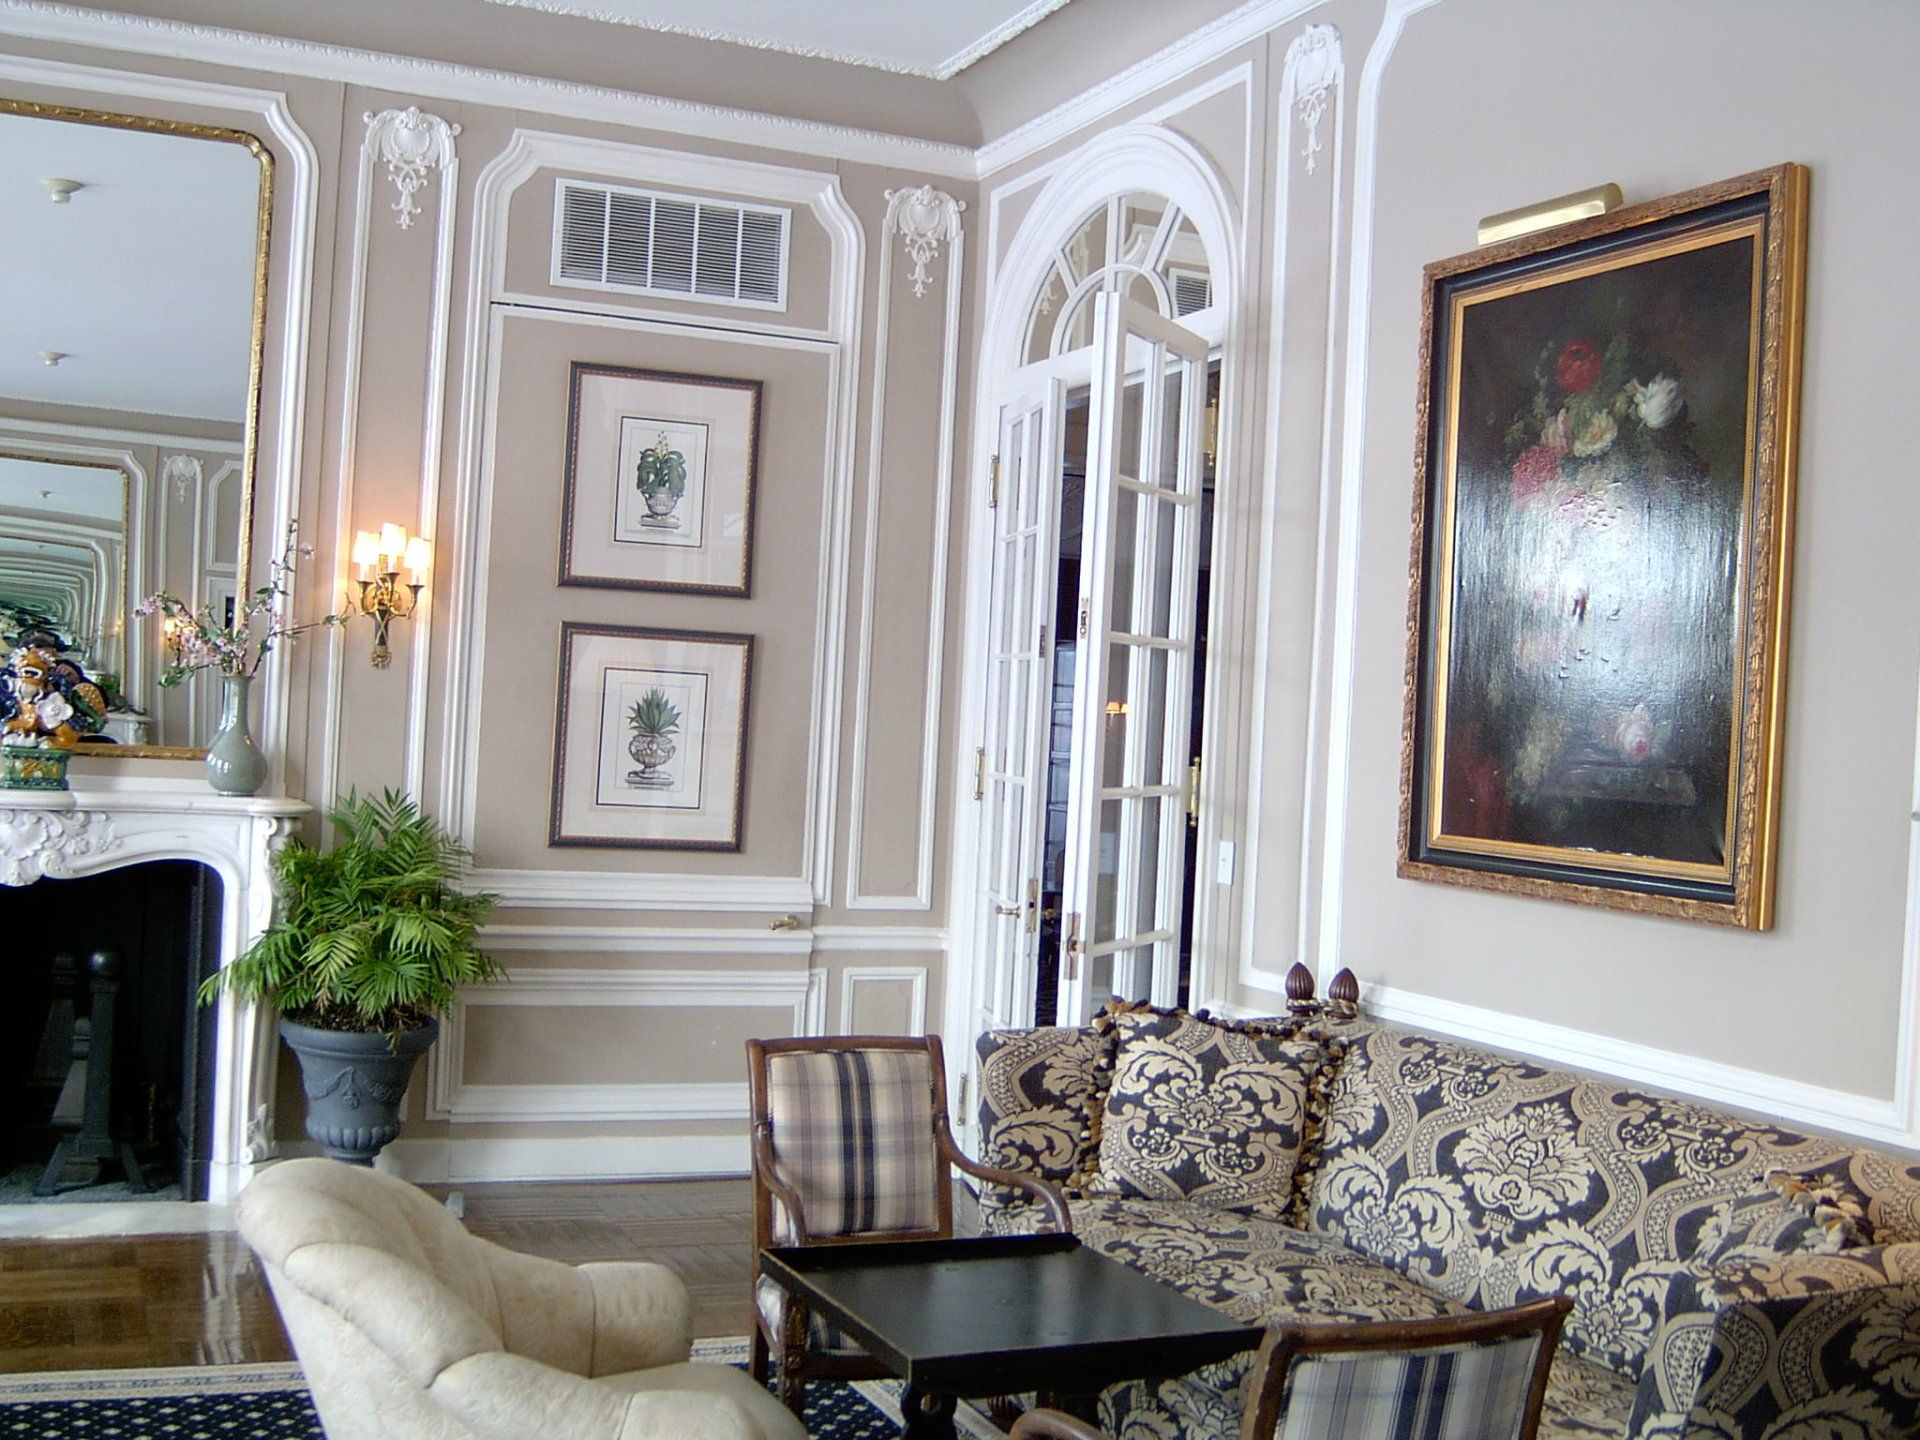 A Palette of Possibilities: All Pro Painting's Impact on Bellmore Interiors